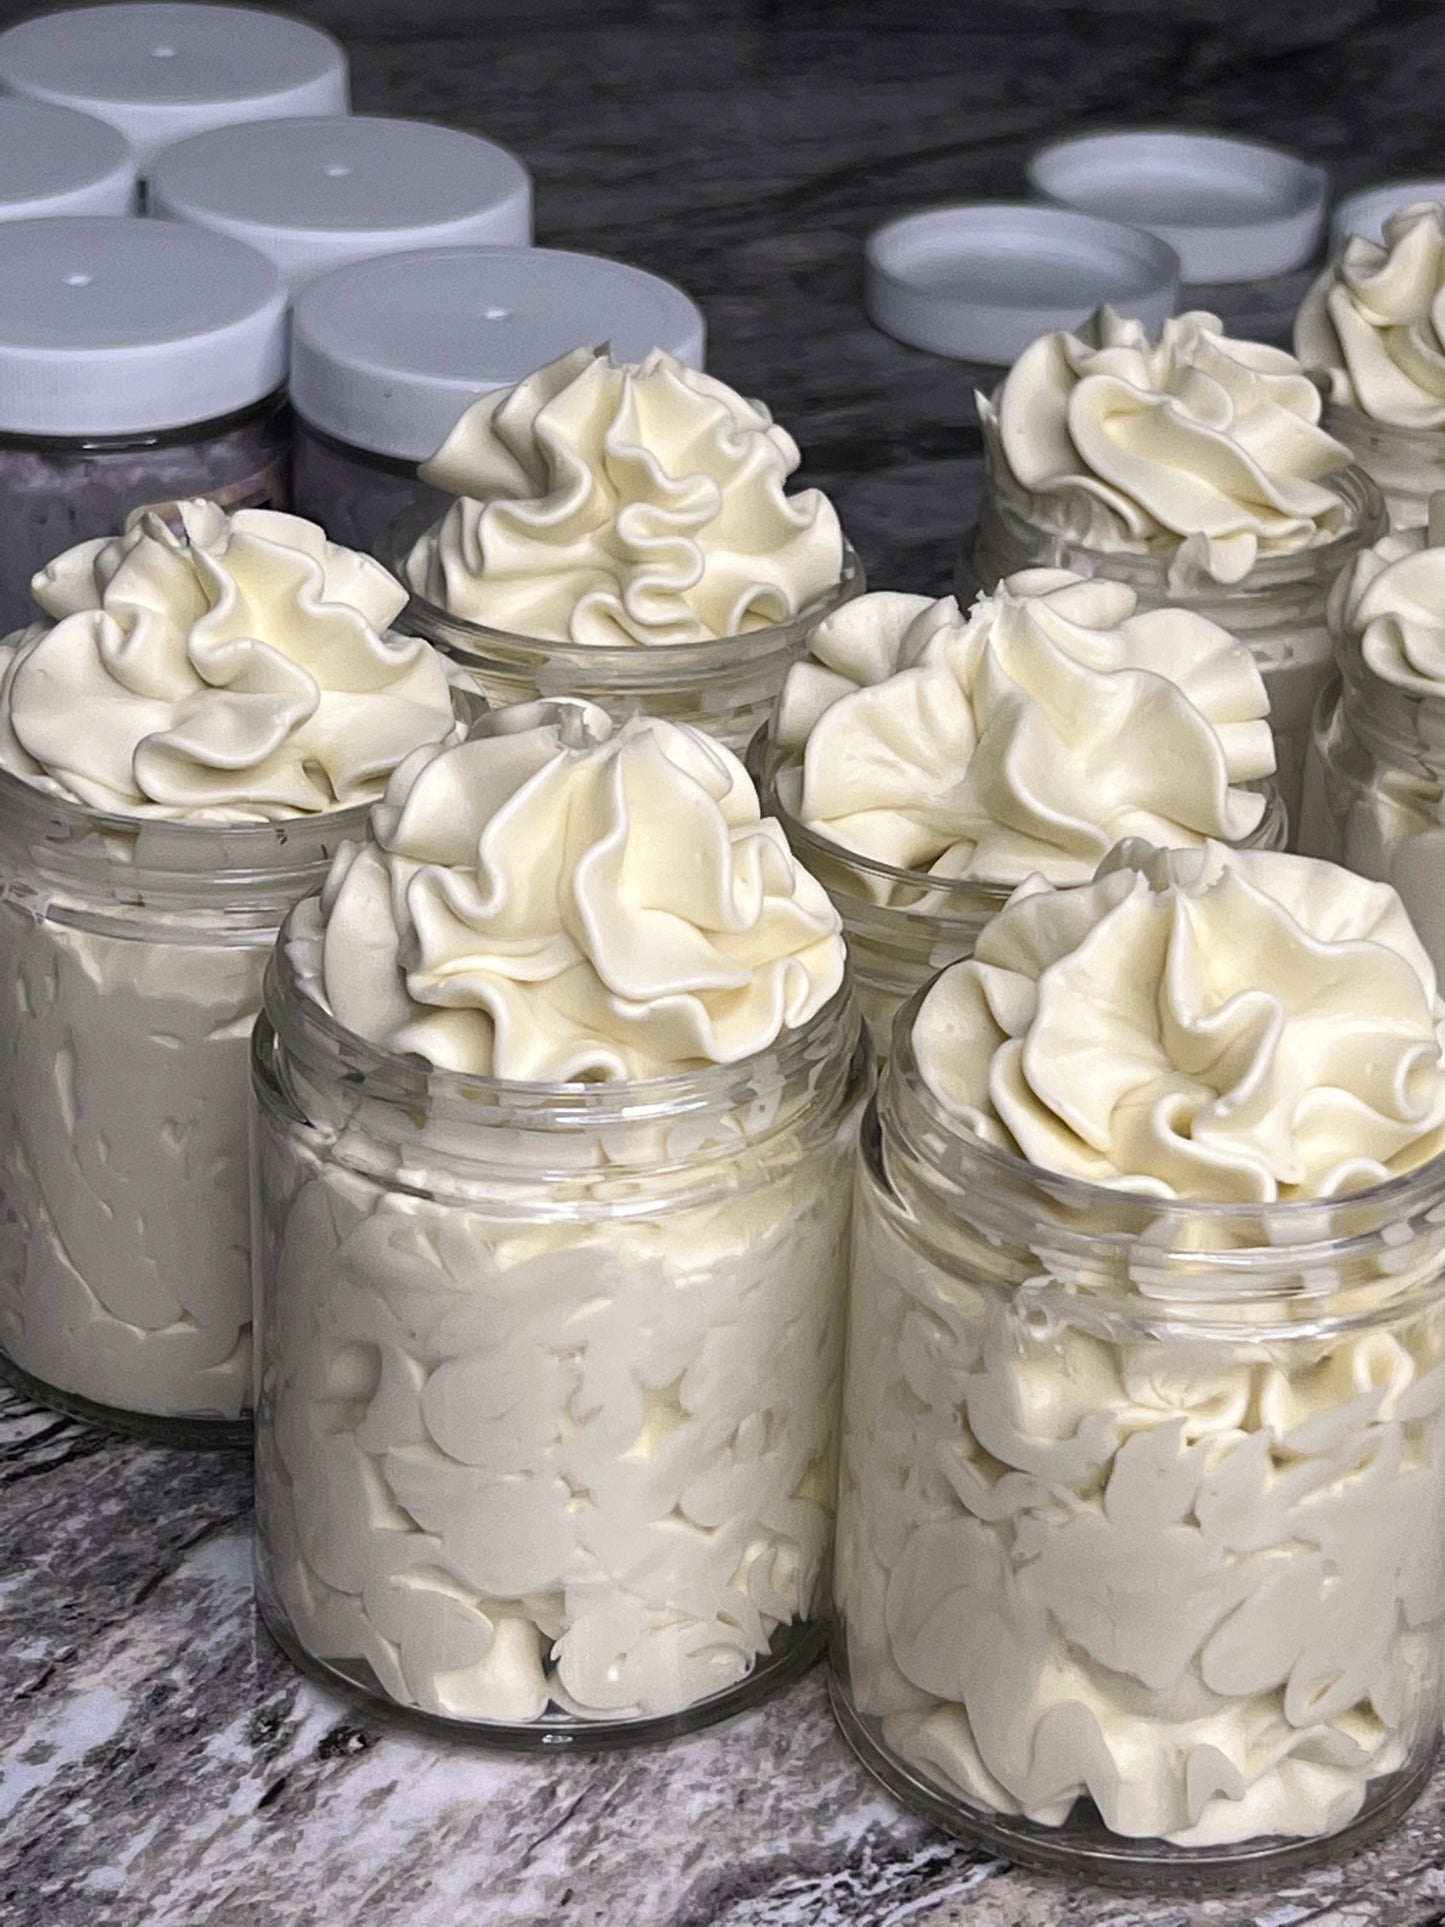 Original Scented Whipped Shea Butter